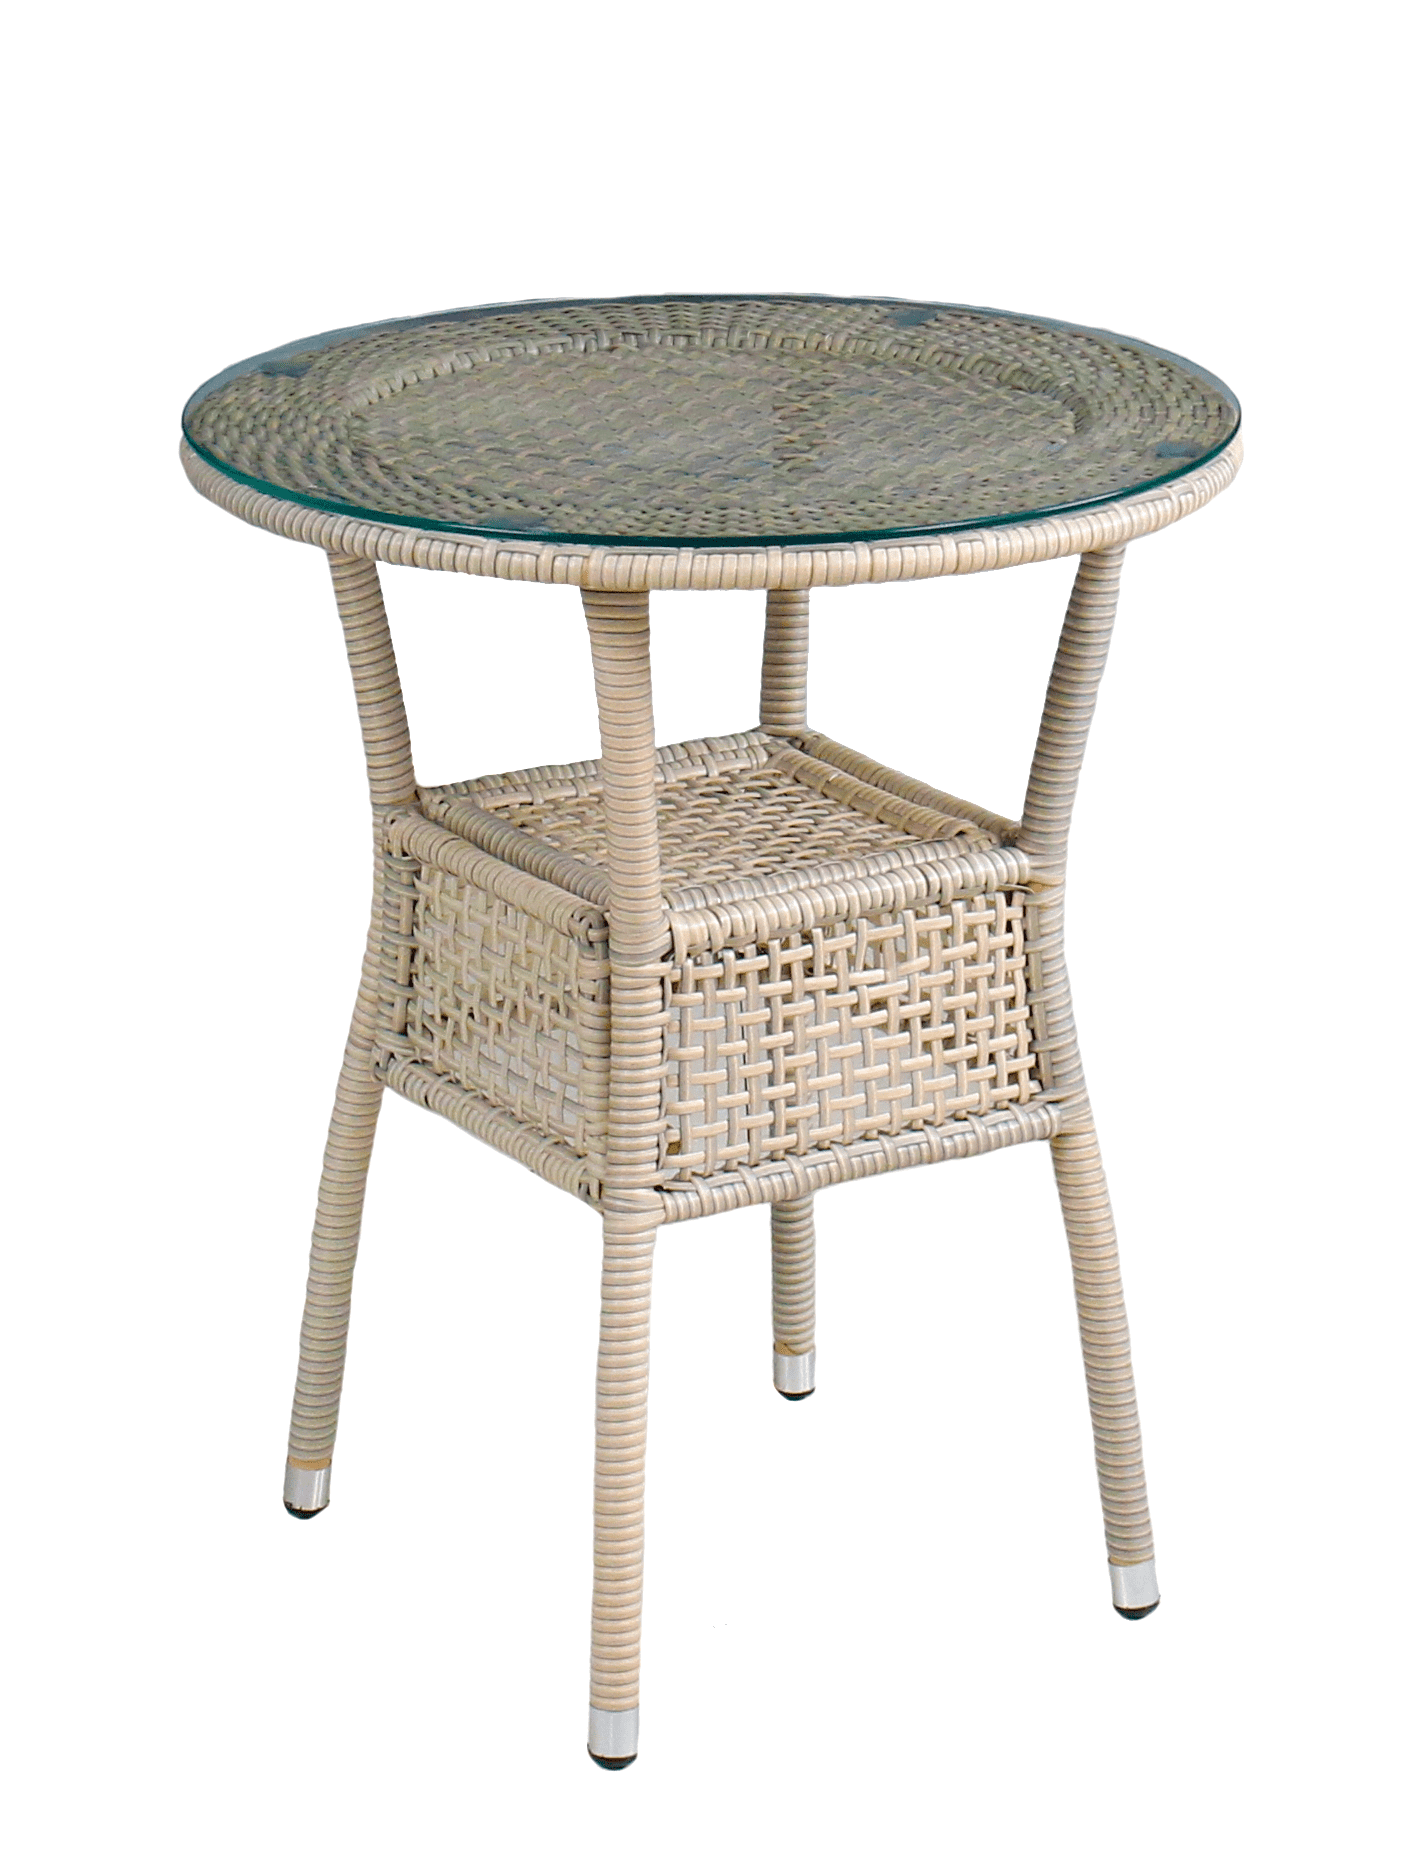 SOFIA COFFEE TABLE IN STEEL Diam 60X 72h covered in synthetic rattan with 6mm glass top